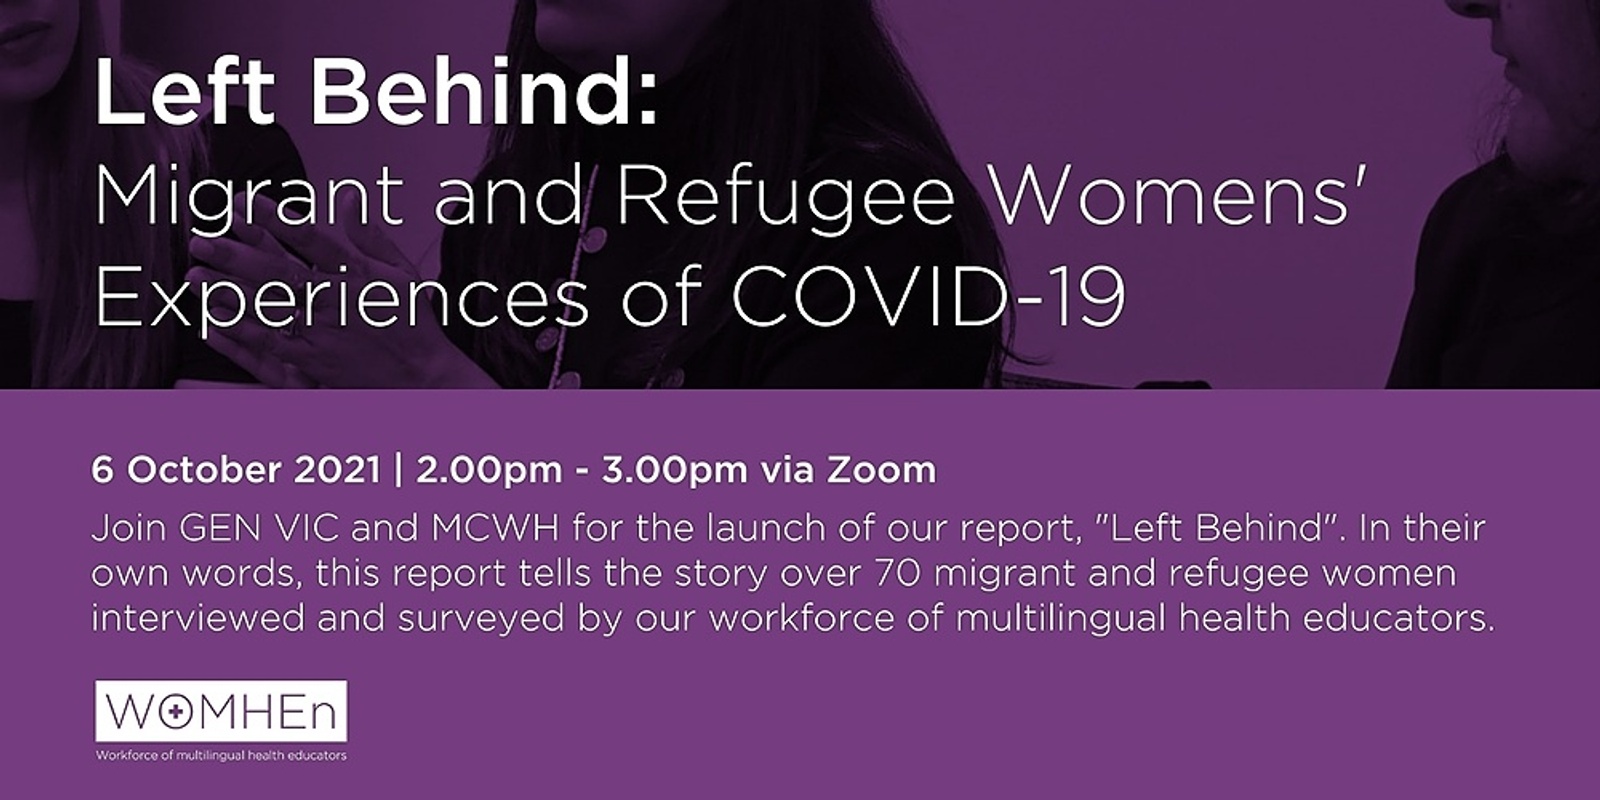 Banner image for Launch of "Left Behind: Migrant and Refugee Womens' Experiences of COVID-19"